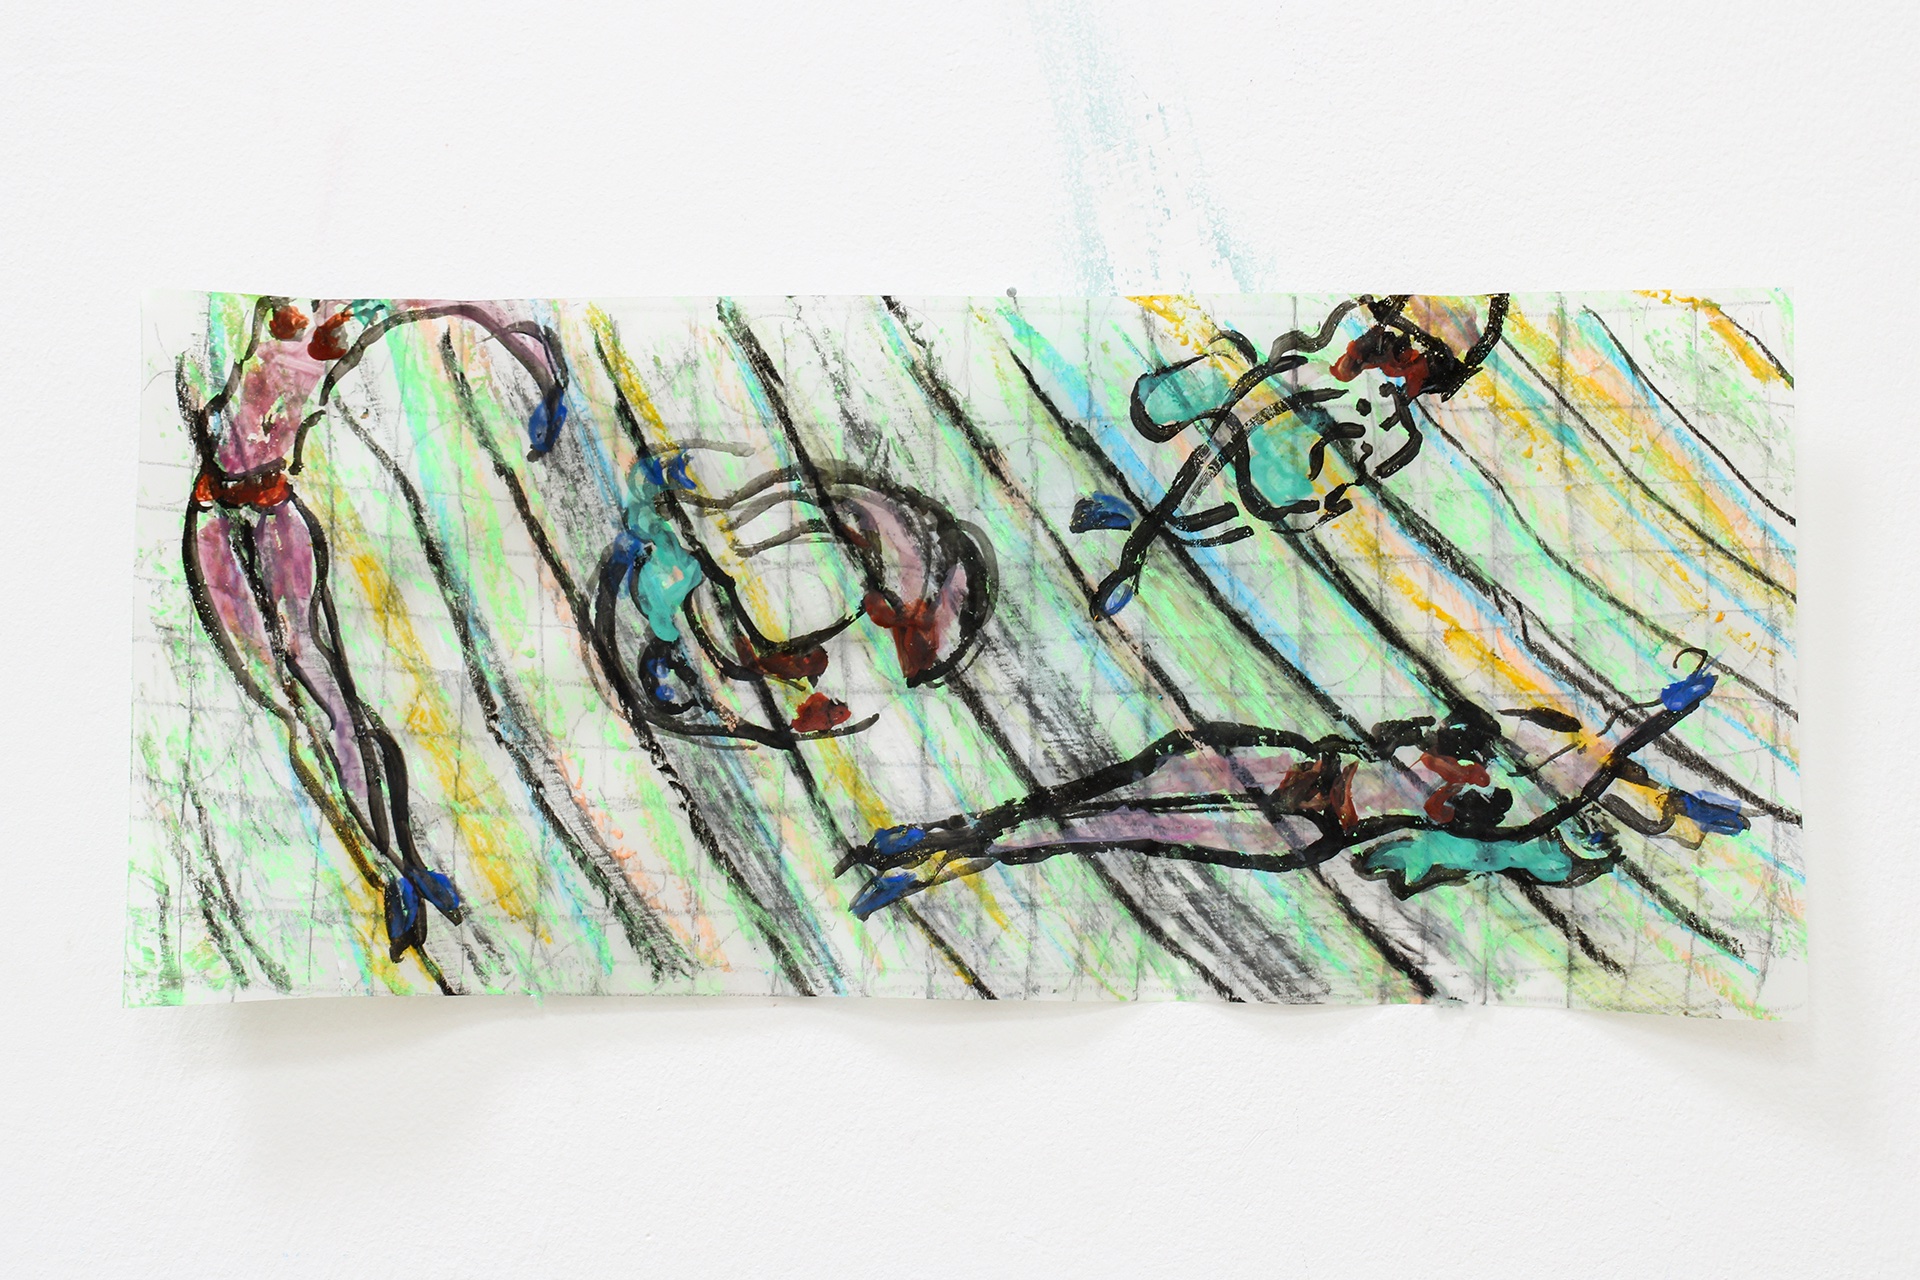 Four acrobats dance and dive across a striped surface painted on tracing paper. 